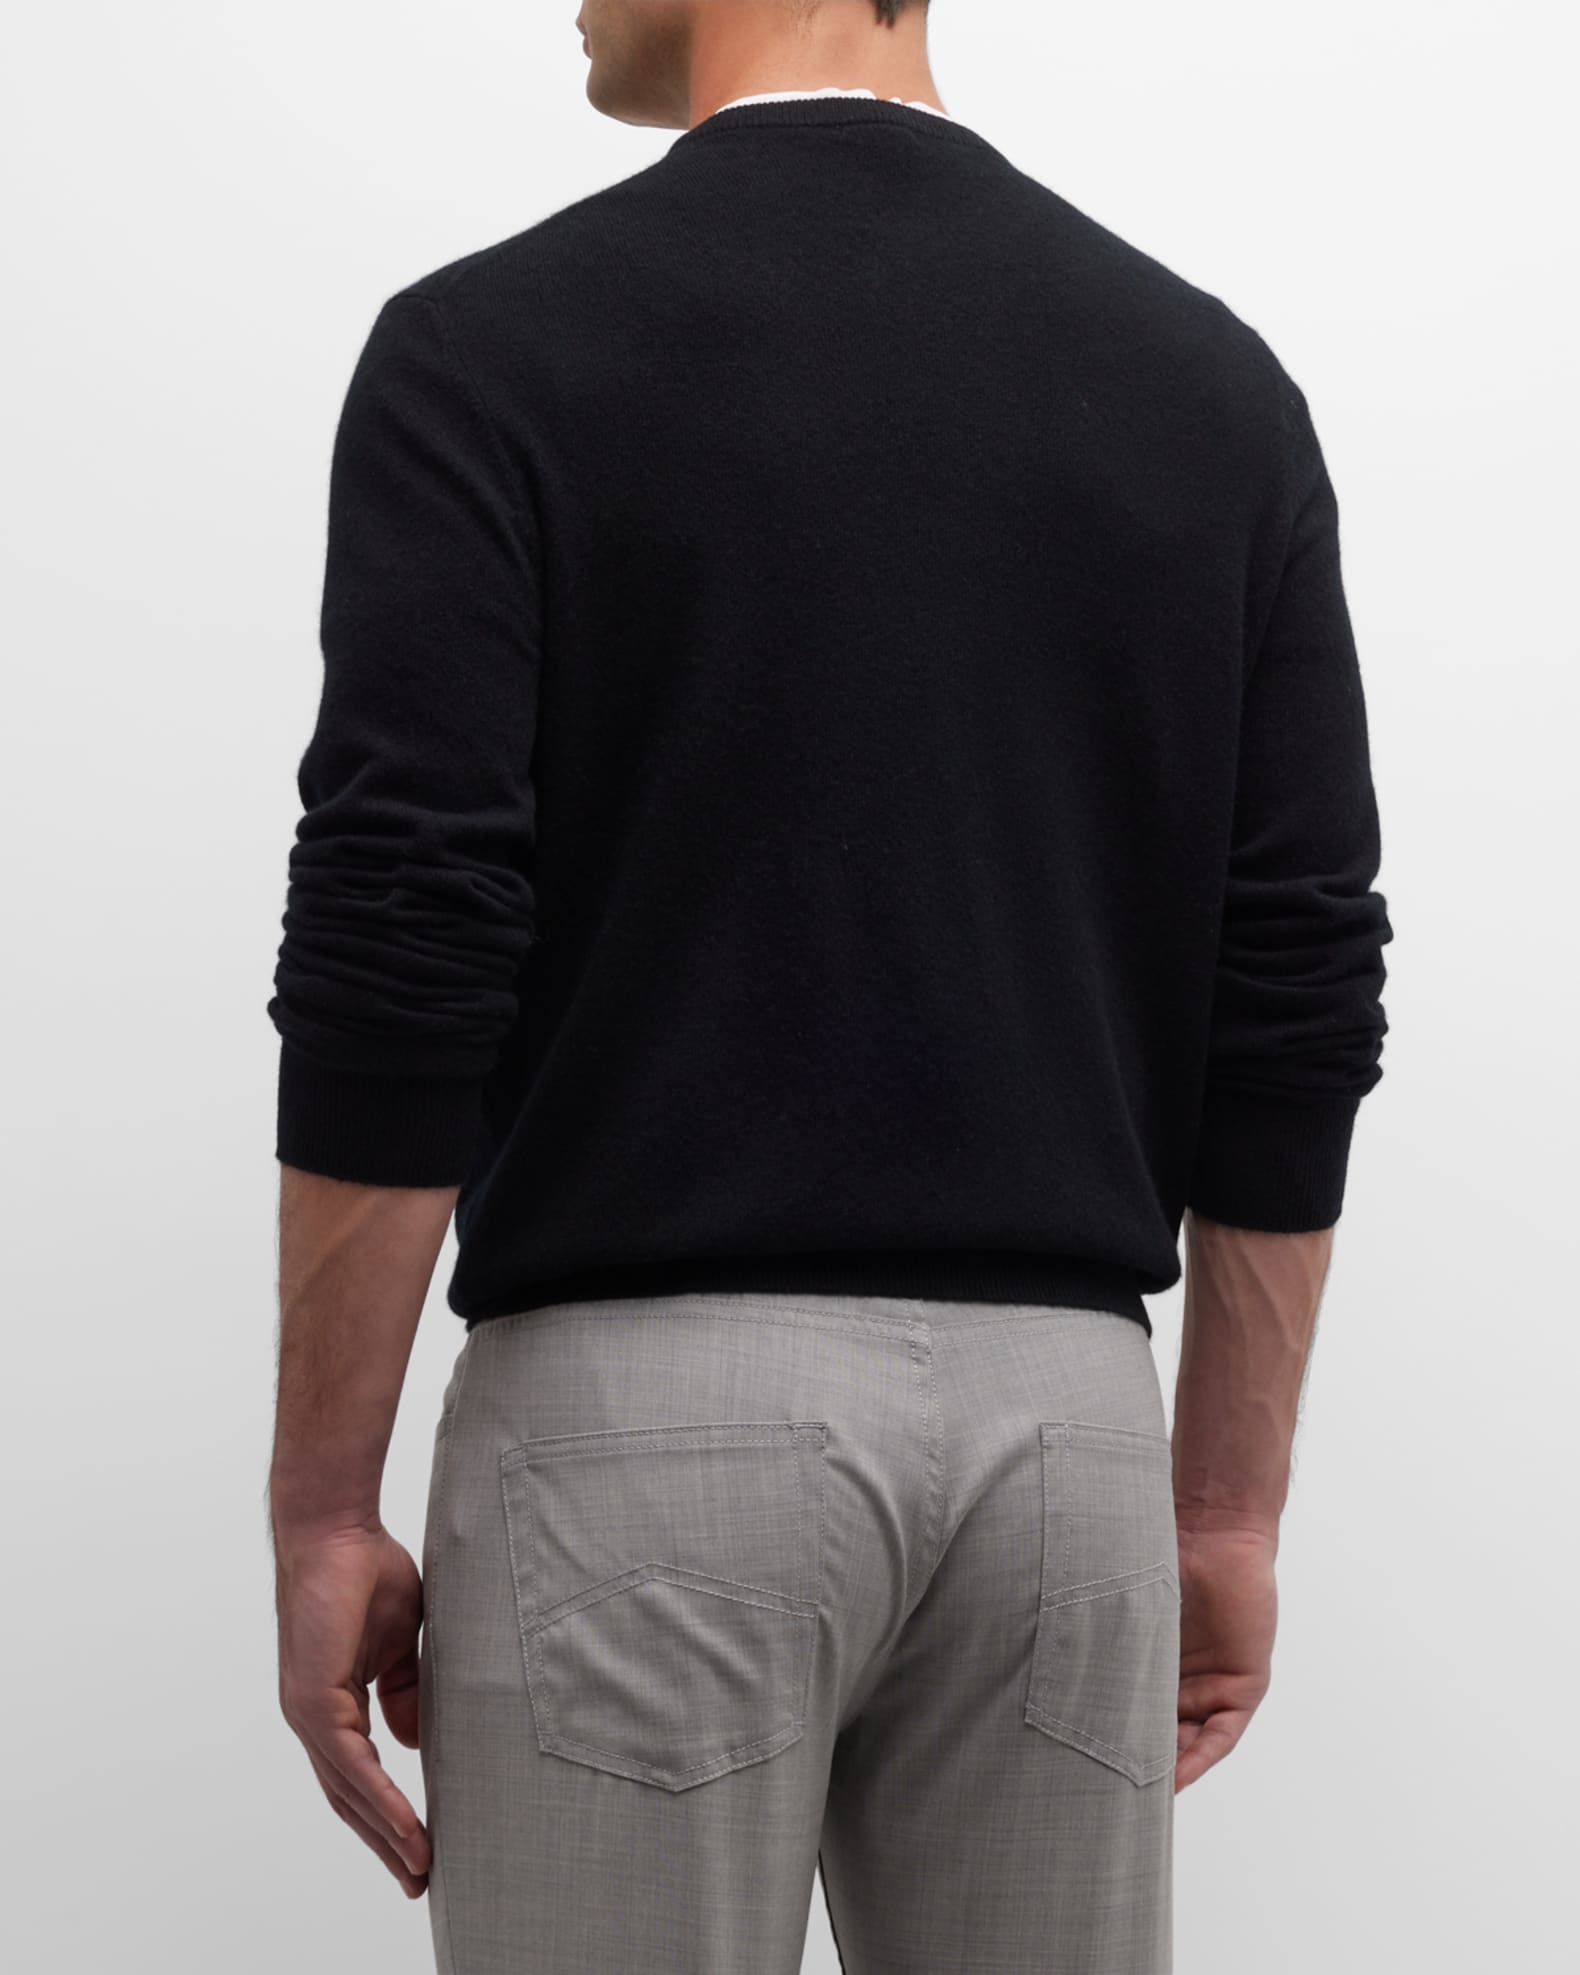 Embossed LV Cashmere Crewneck - Men - Ready-to-Wear